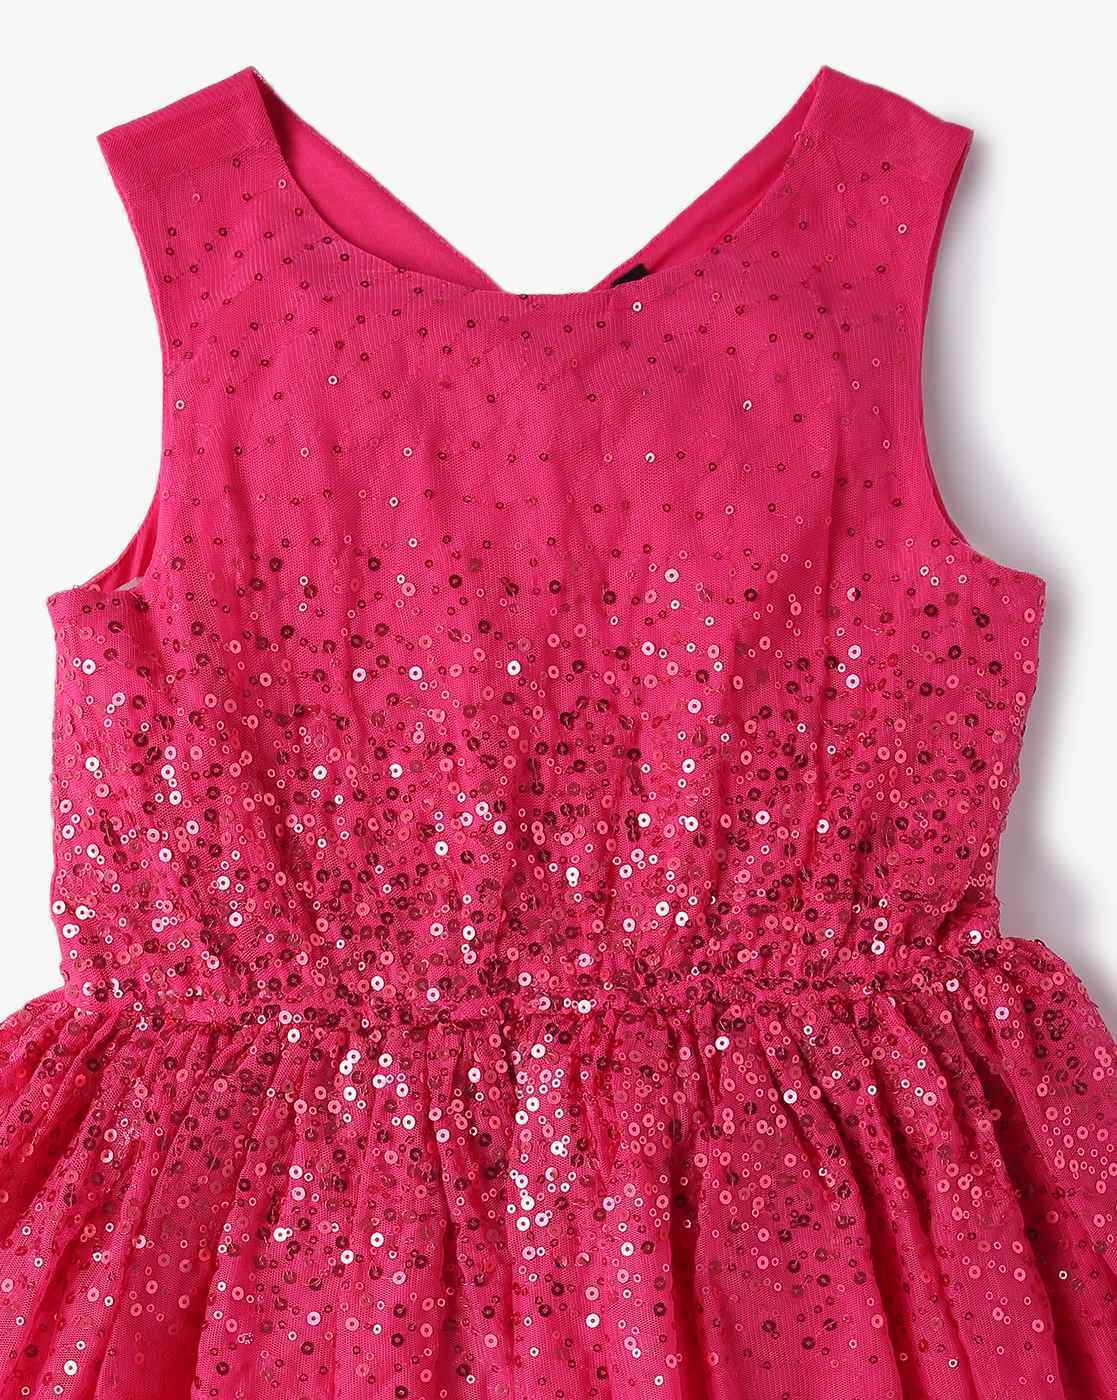 Share 143+ pink sequin dress latest